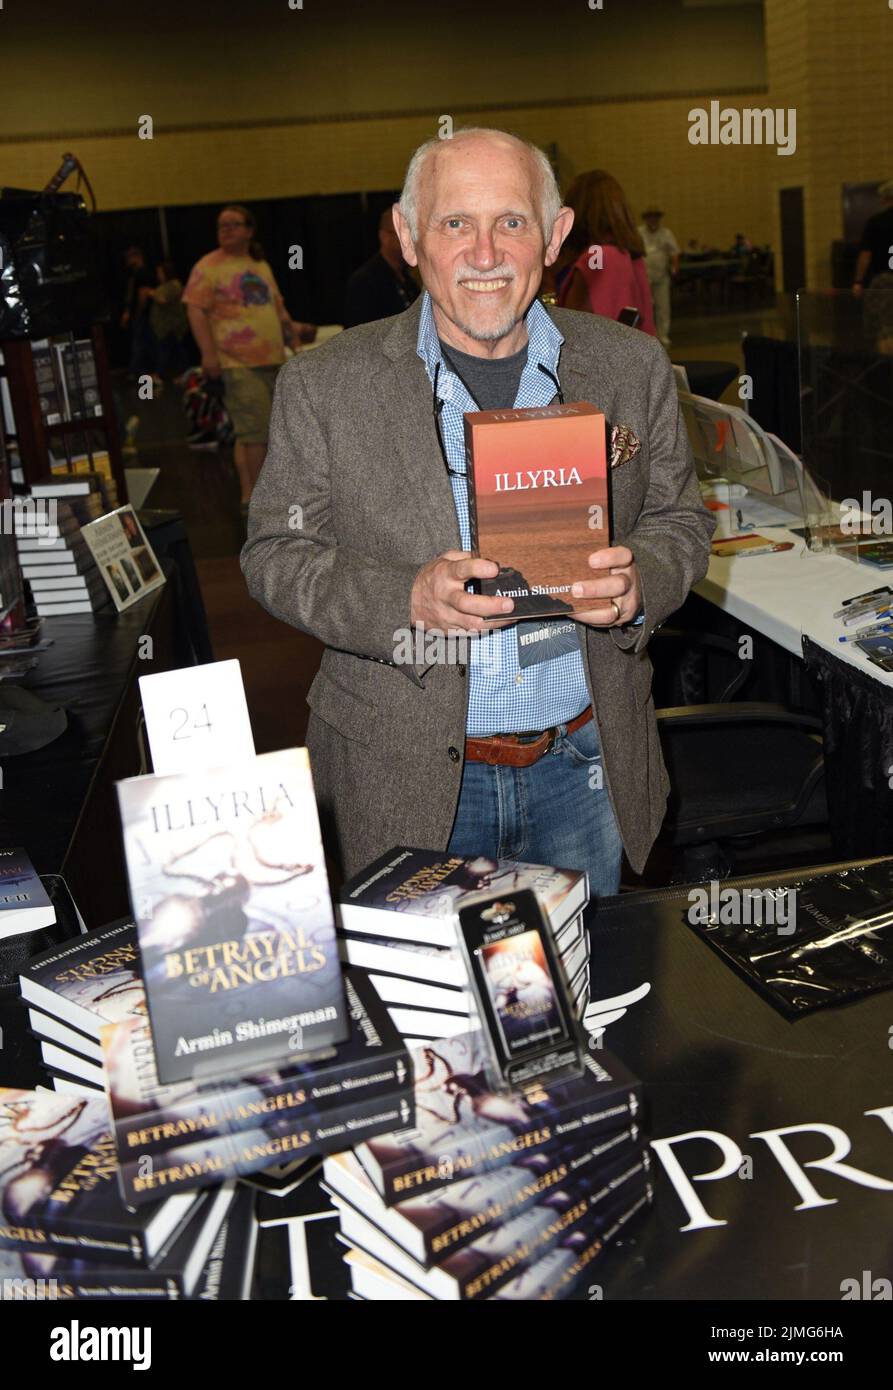 Knoxville, TN, USA. 5th Aug, 2022. Armin Shimerman in attendance for Fanboy Expo 2022, Knoxville Convention Center, Knoxville, TN August 5, 2022. Credit: Derek Storm/Everett Collection/Alamy Live News Stock Photo